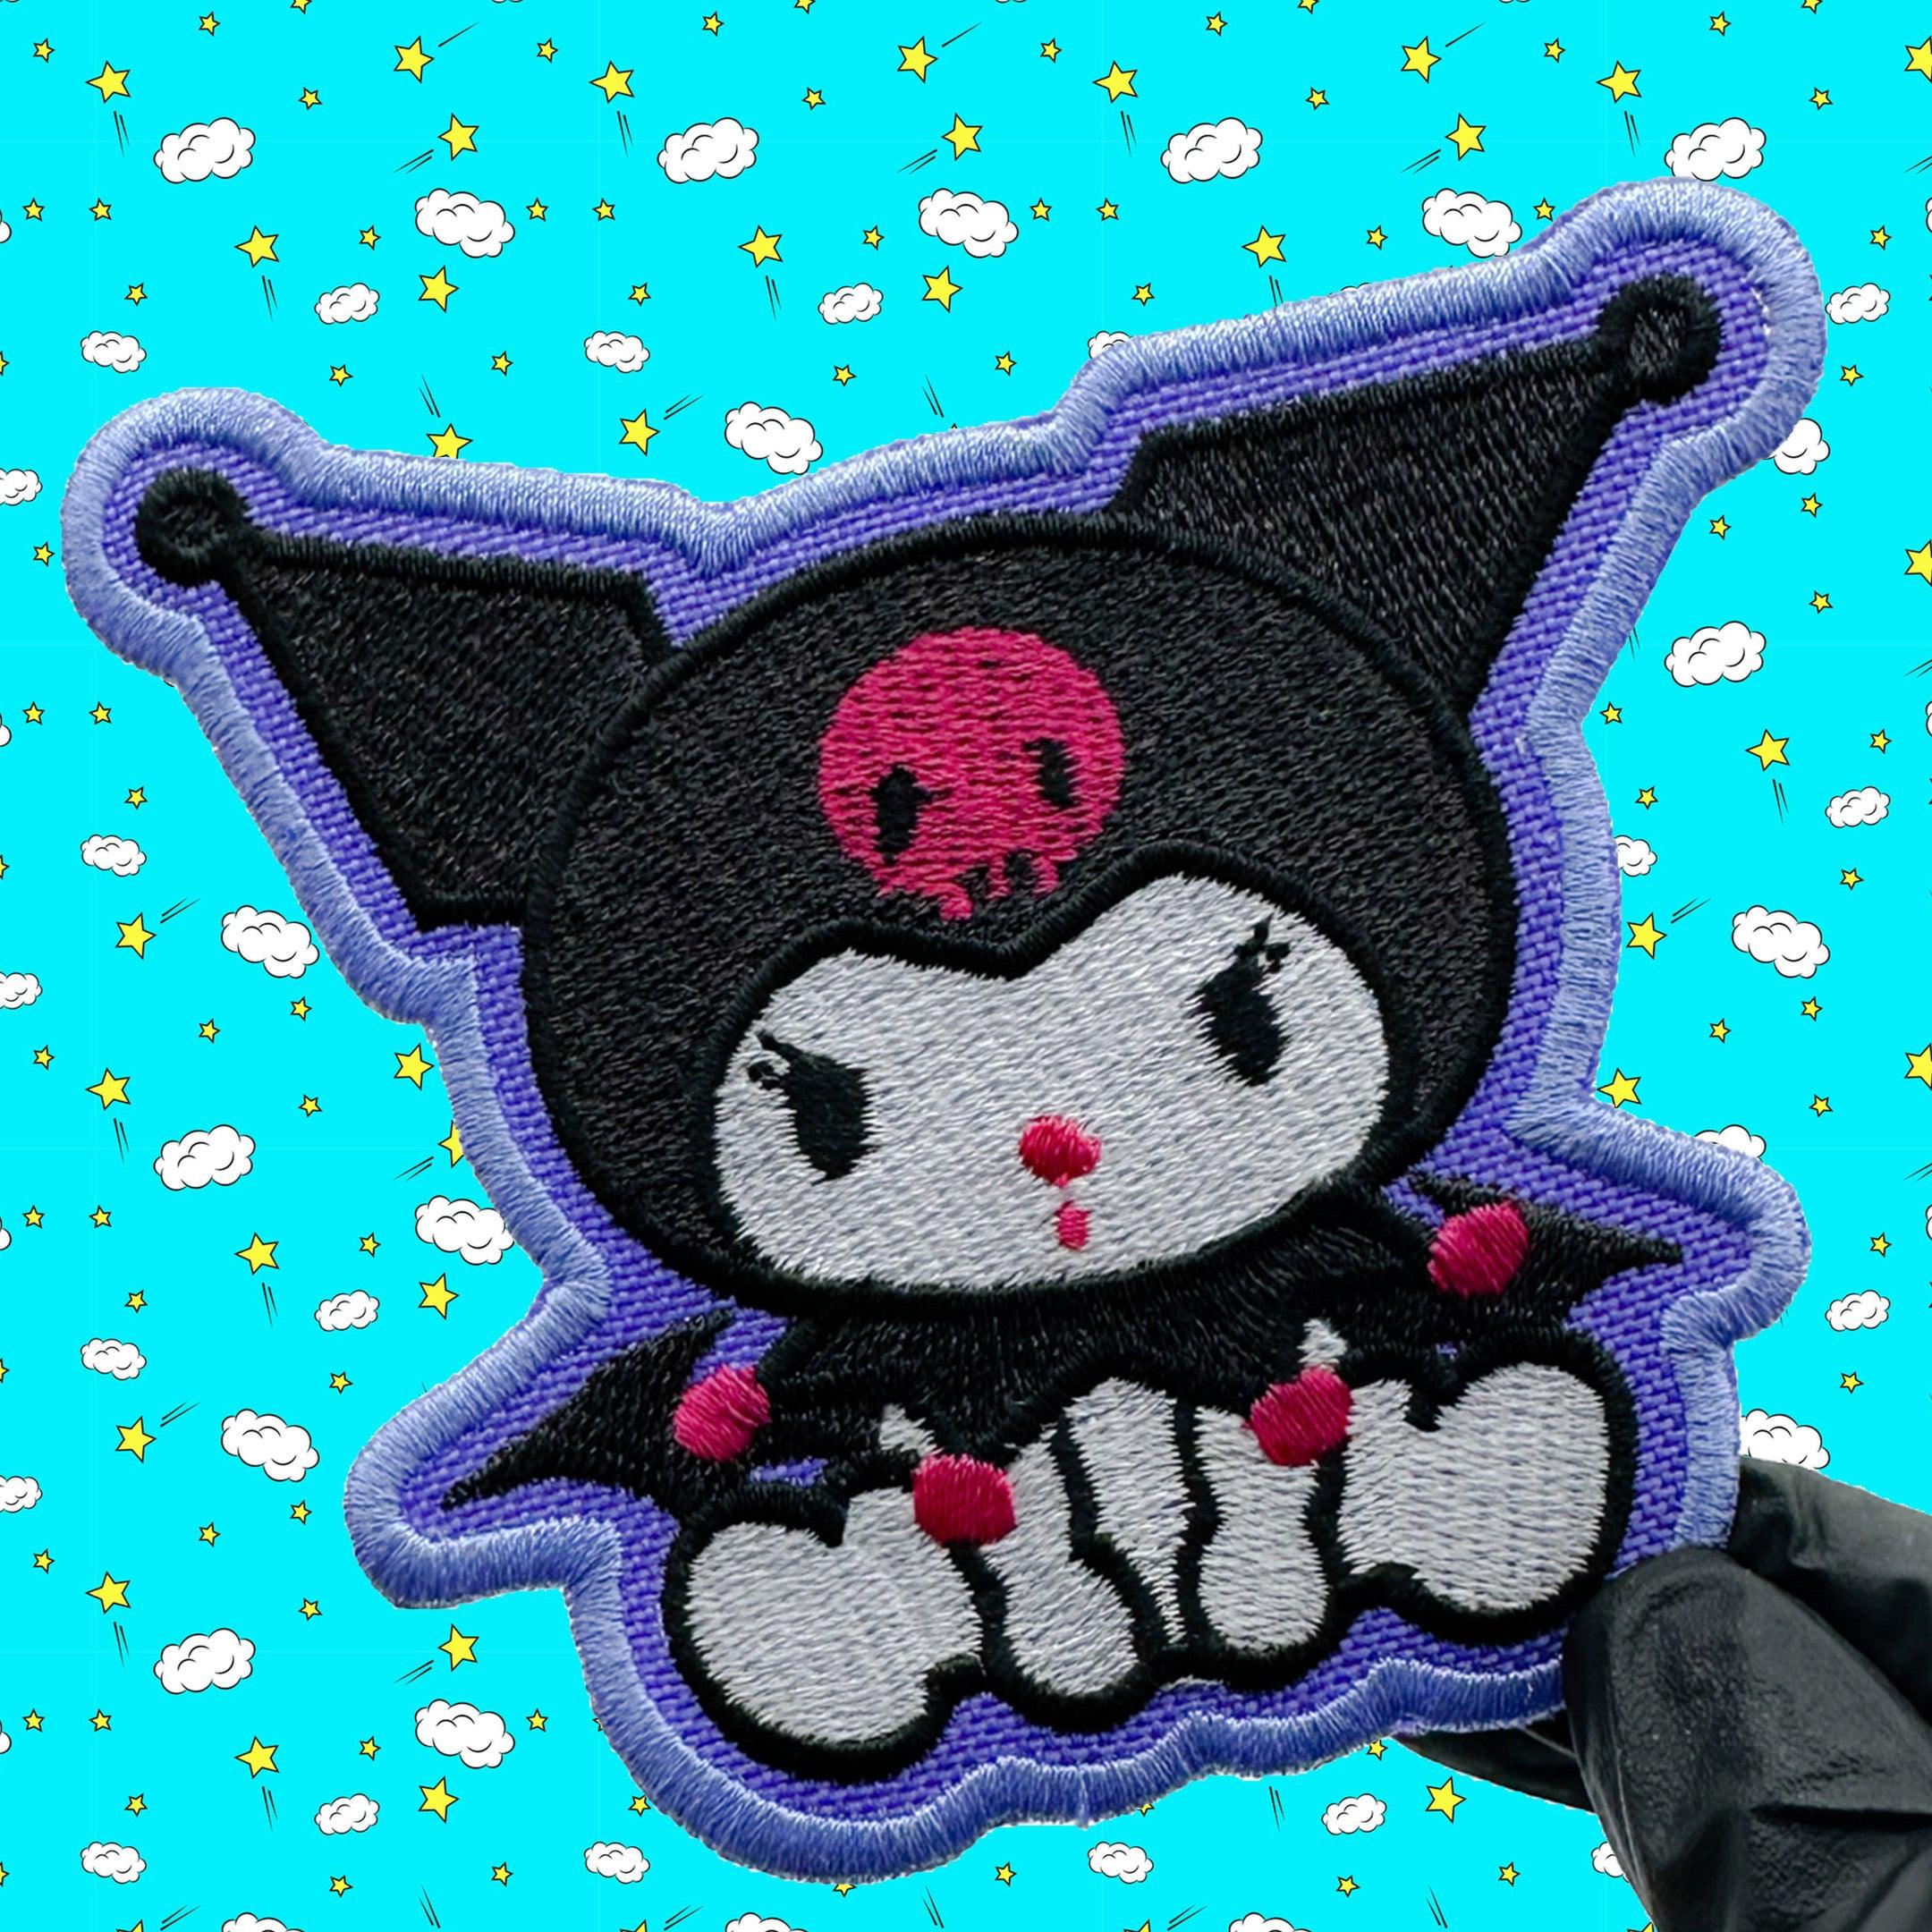 Anime Patches Iron on Clothes, Kawaii Embroidered Patch, Patch for Jacket 